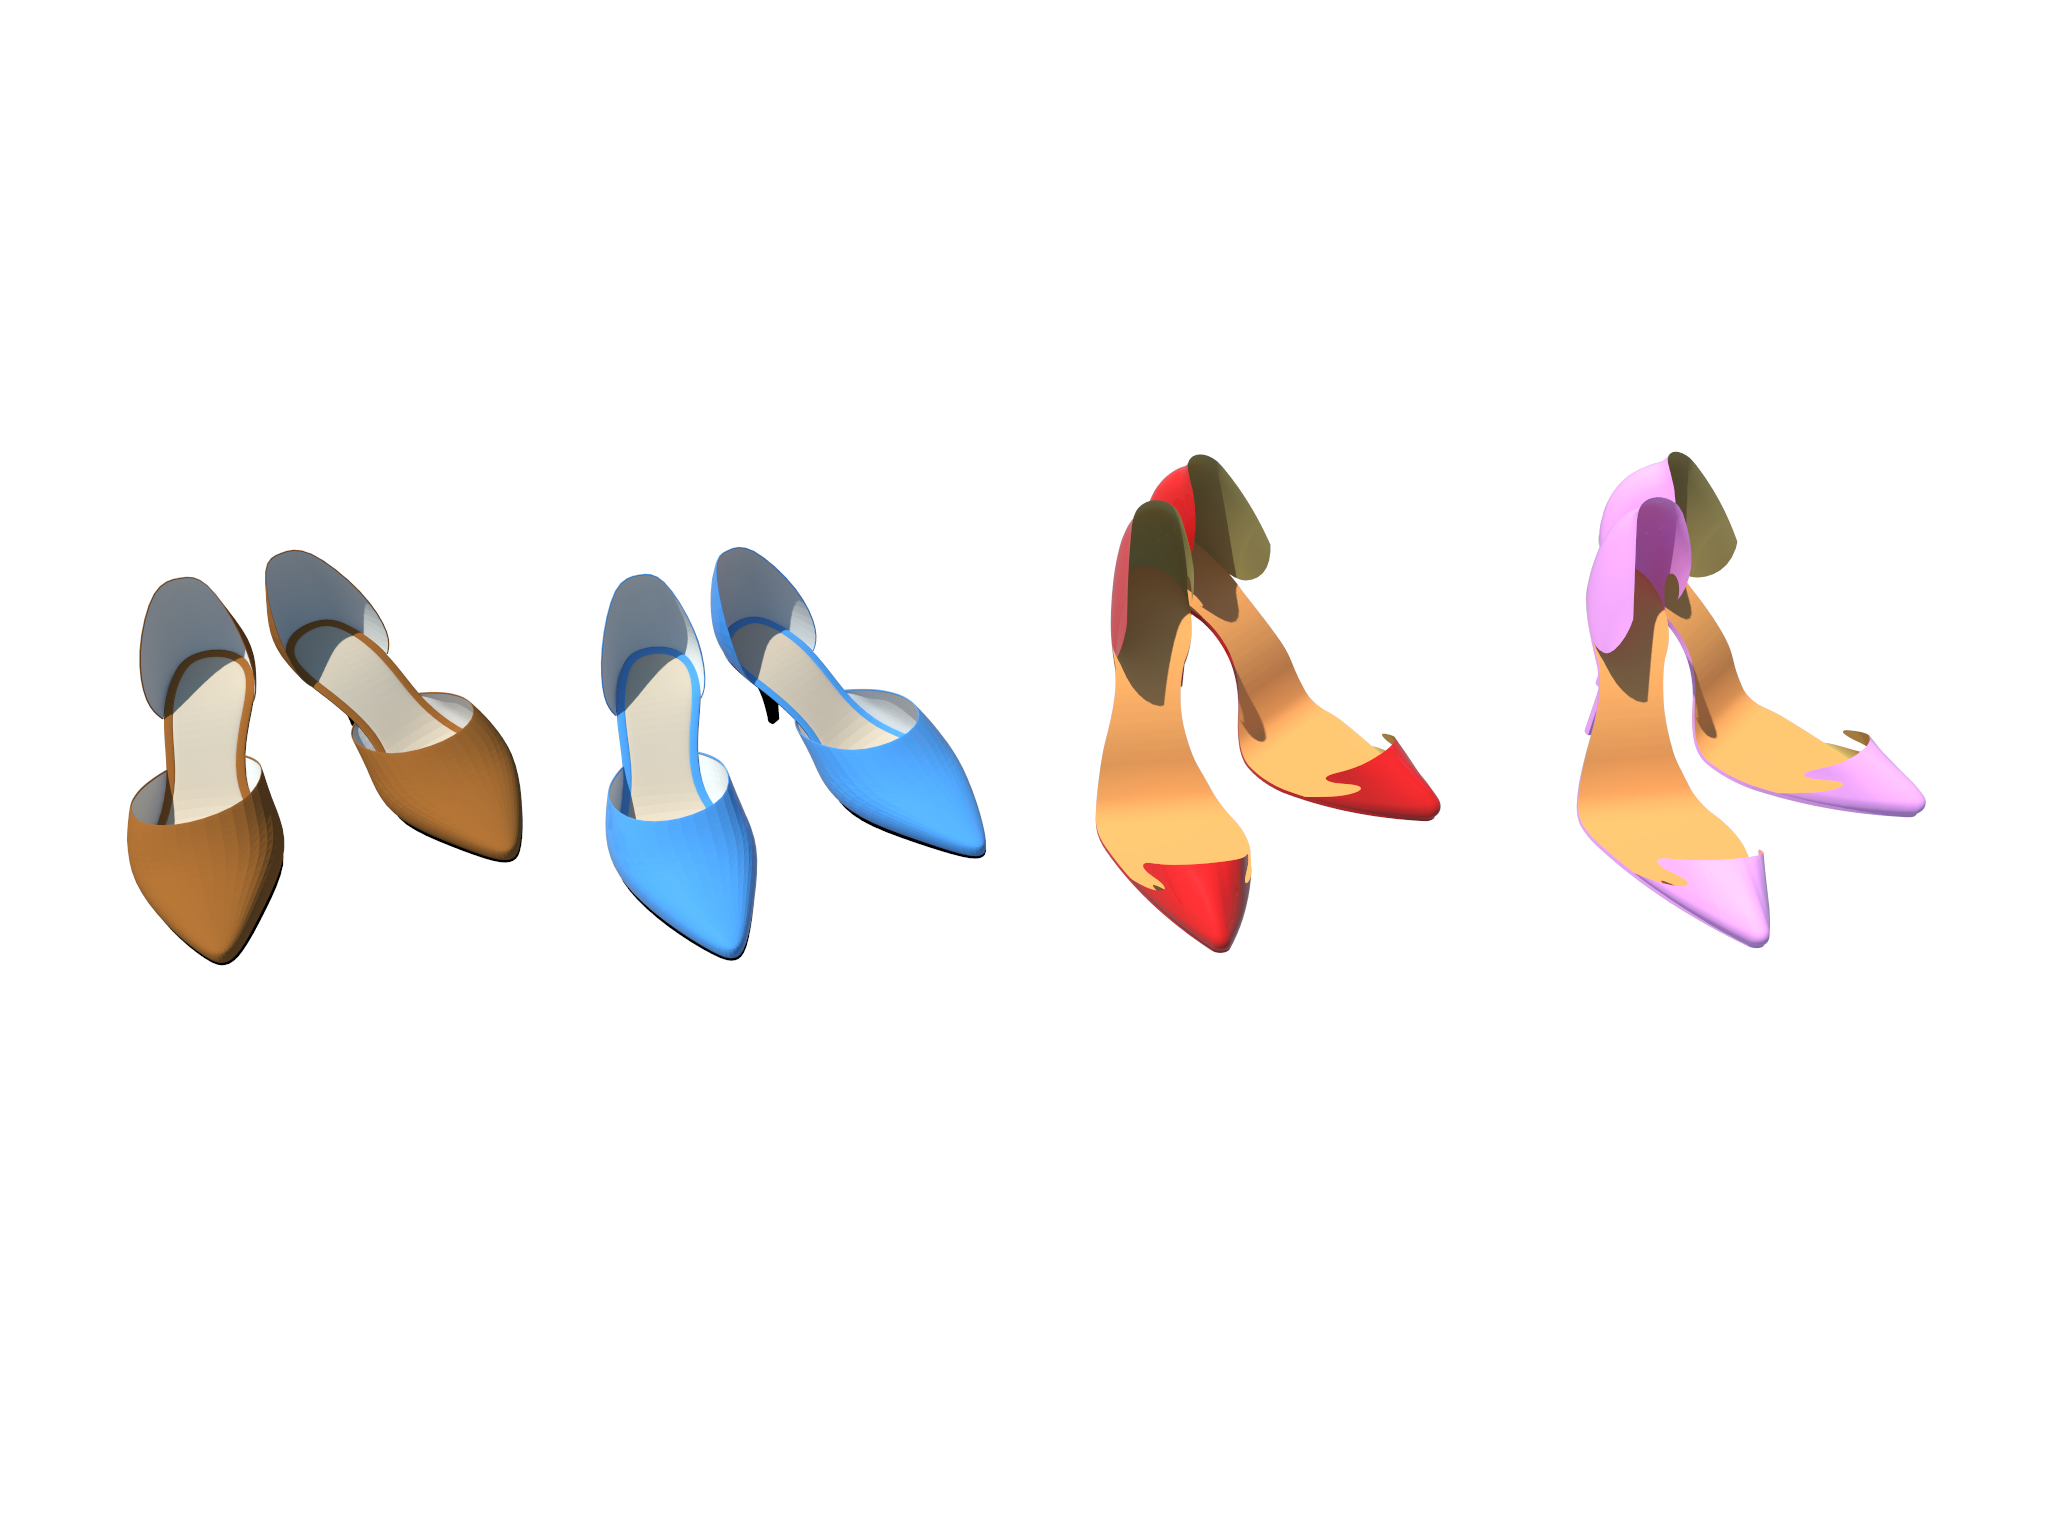 Eye-Candy, a footwear invention specially designed to provide women with a pair of shoes that is unique, stylish and comfortable.